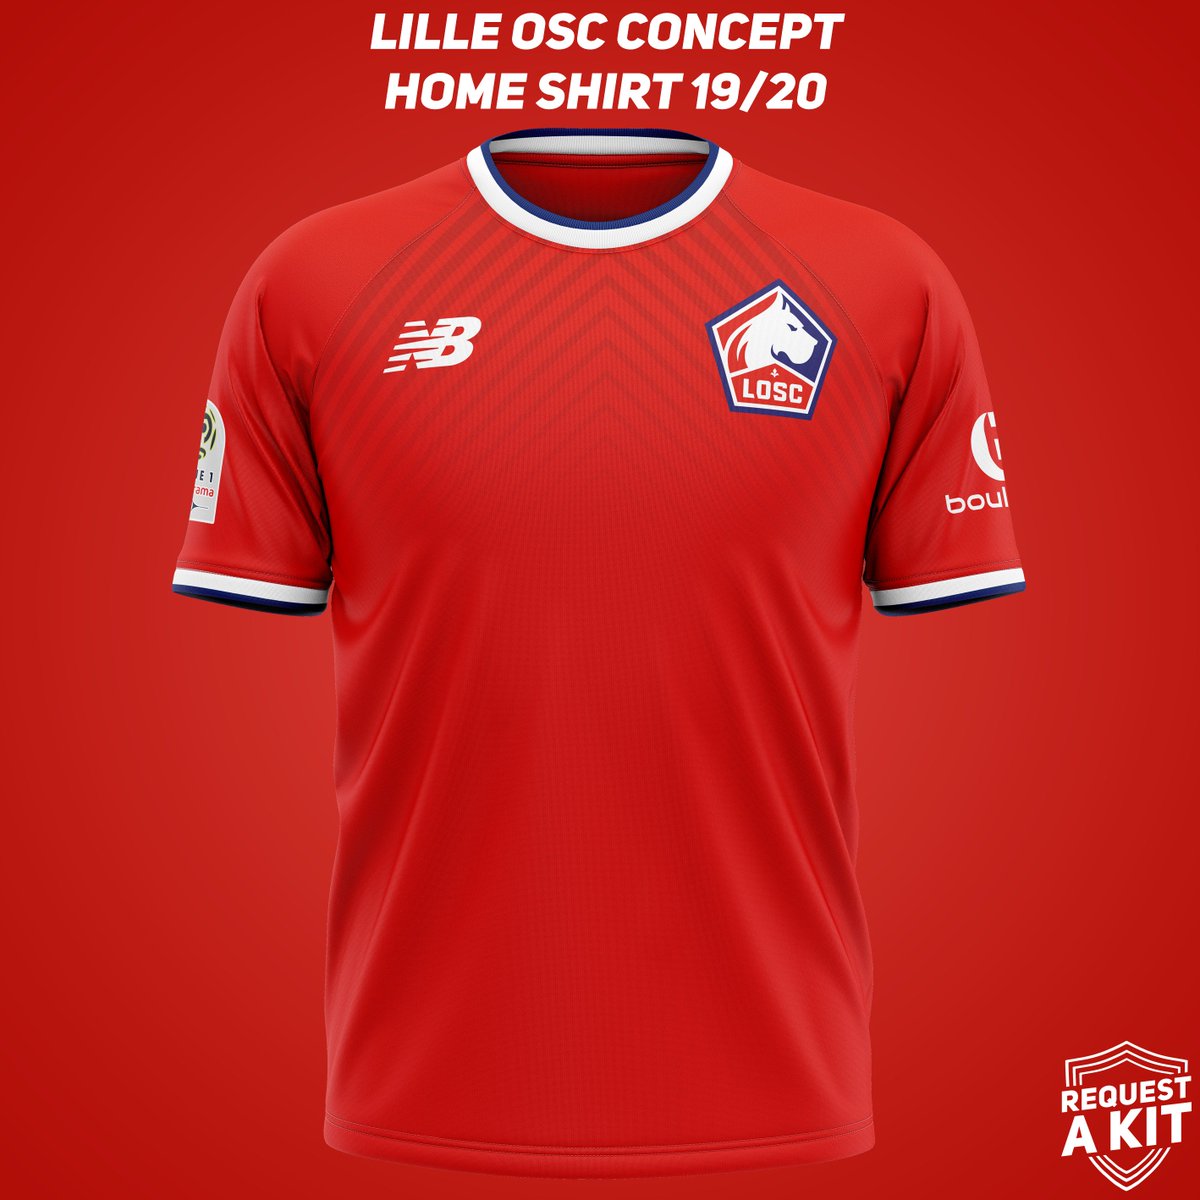 Request A Kit On Twitter Lille Osc Concept Home Away And Third Shirts 2019 20 Requested By Jones6jack Losc Lille Fm19 Wearethecommunity Download For Your Football Manager Save Here Https T Co Npimqueoua Https T Co Ga4h2wkd5x